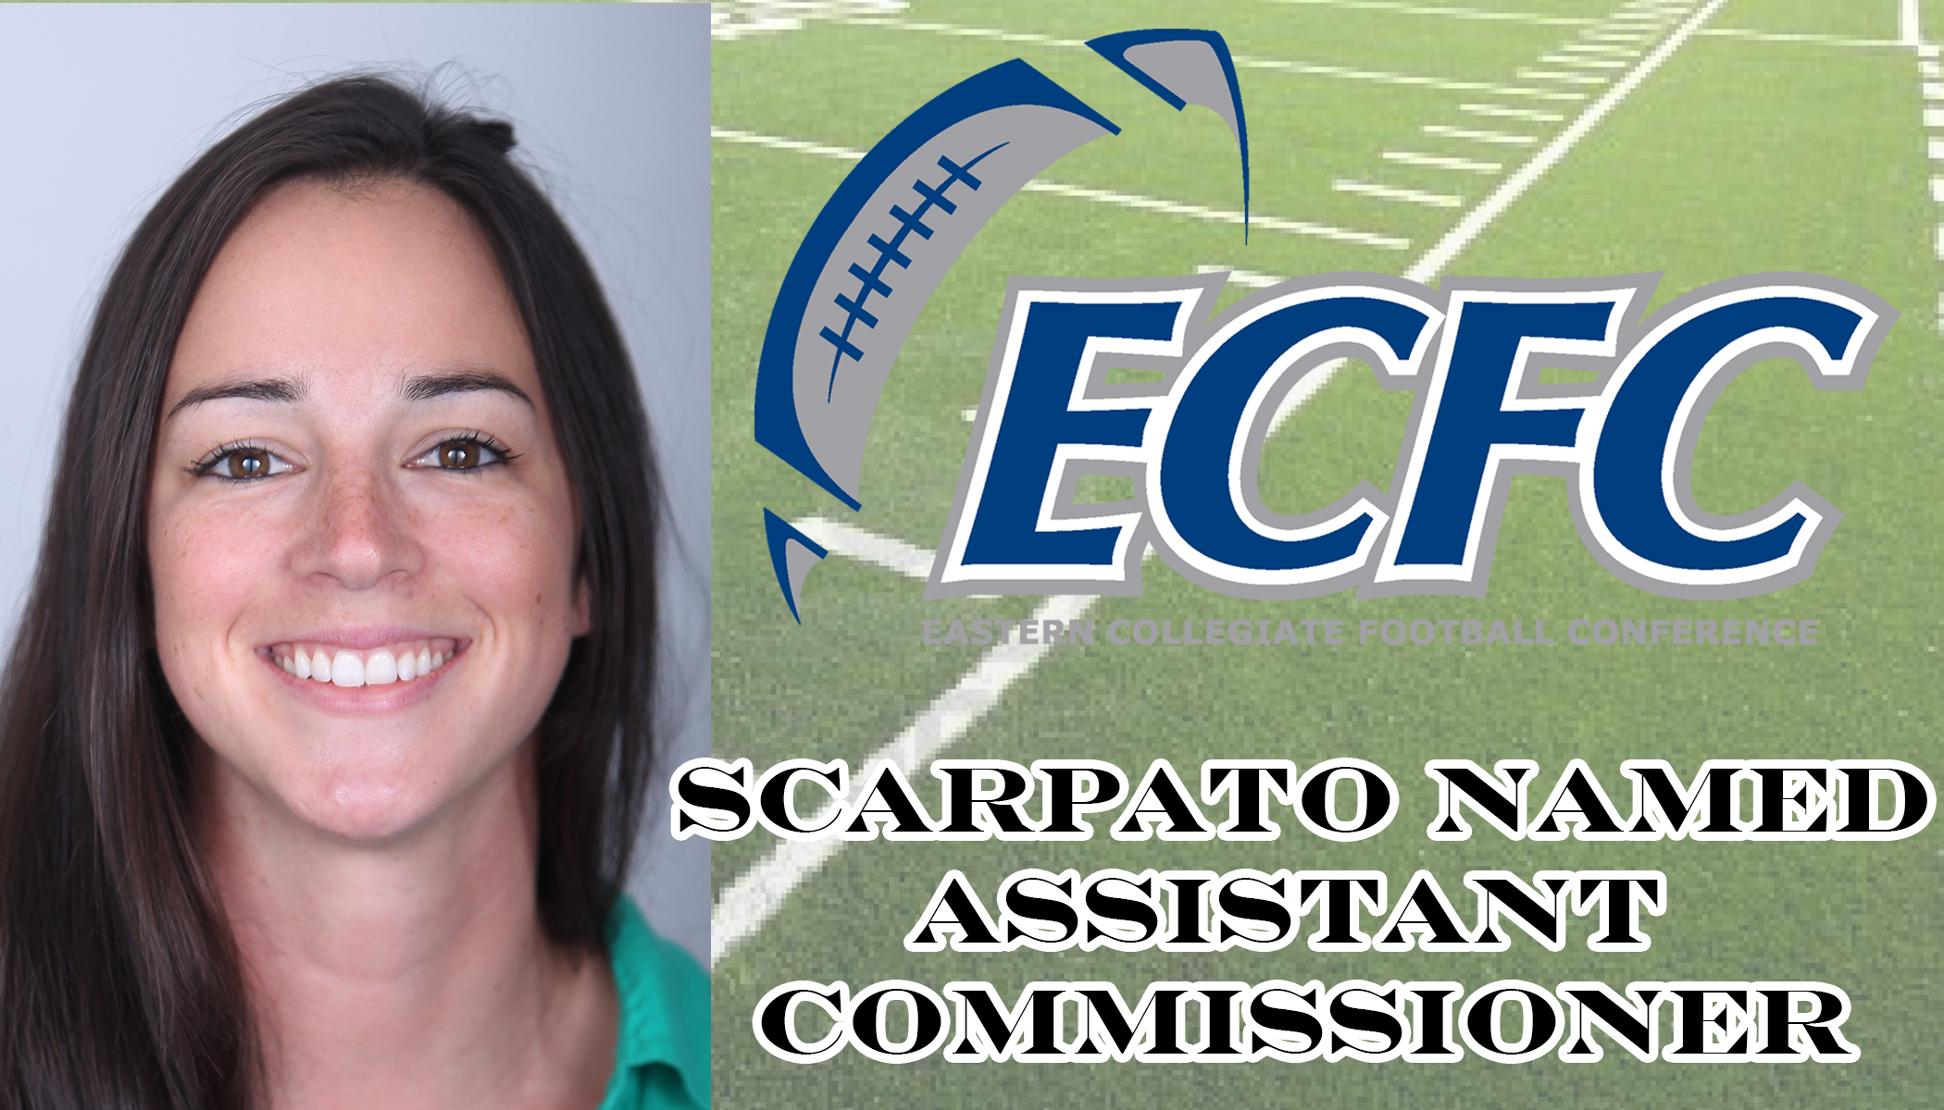 Stephanie Scarpato Named ECFC Assistant Commissioner